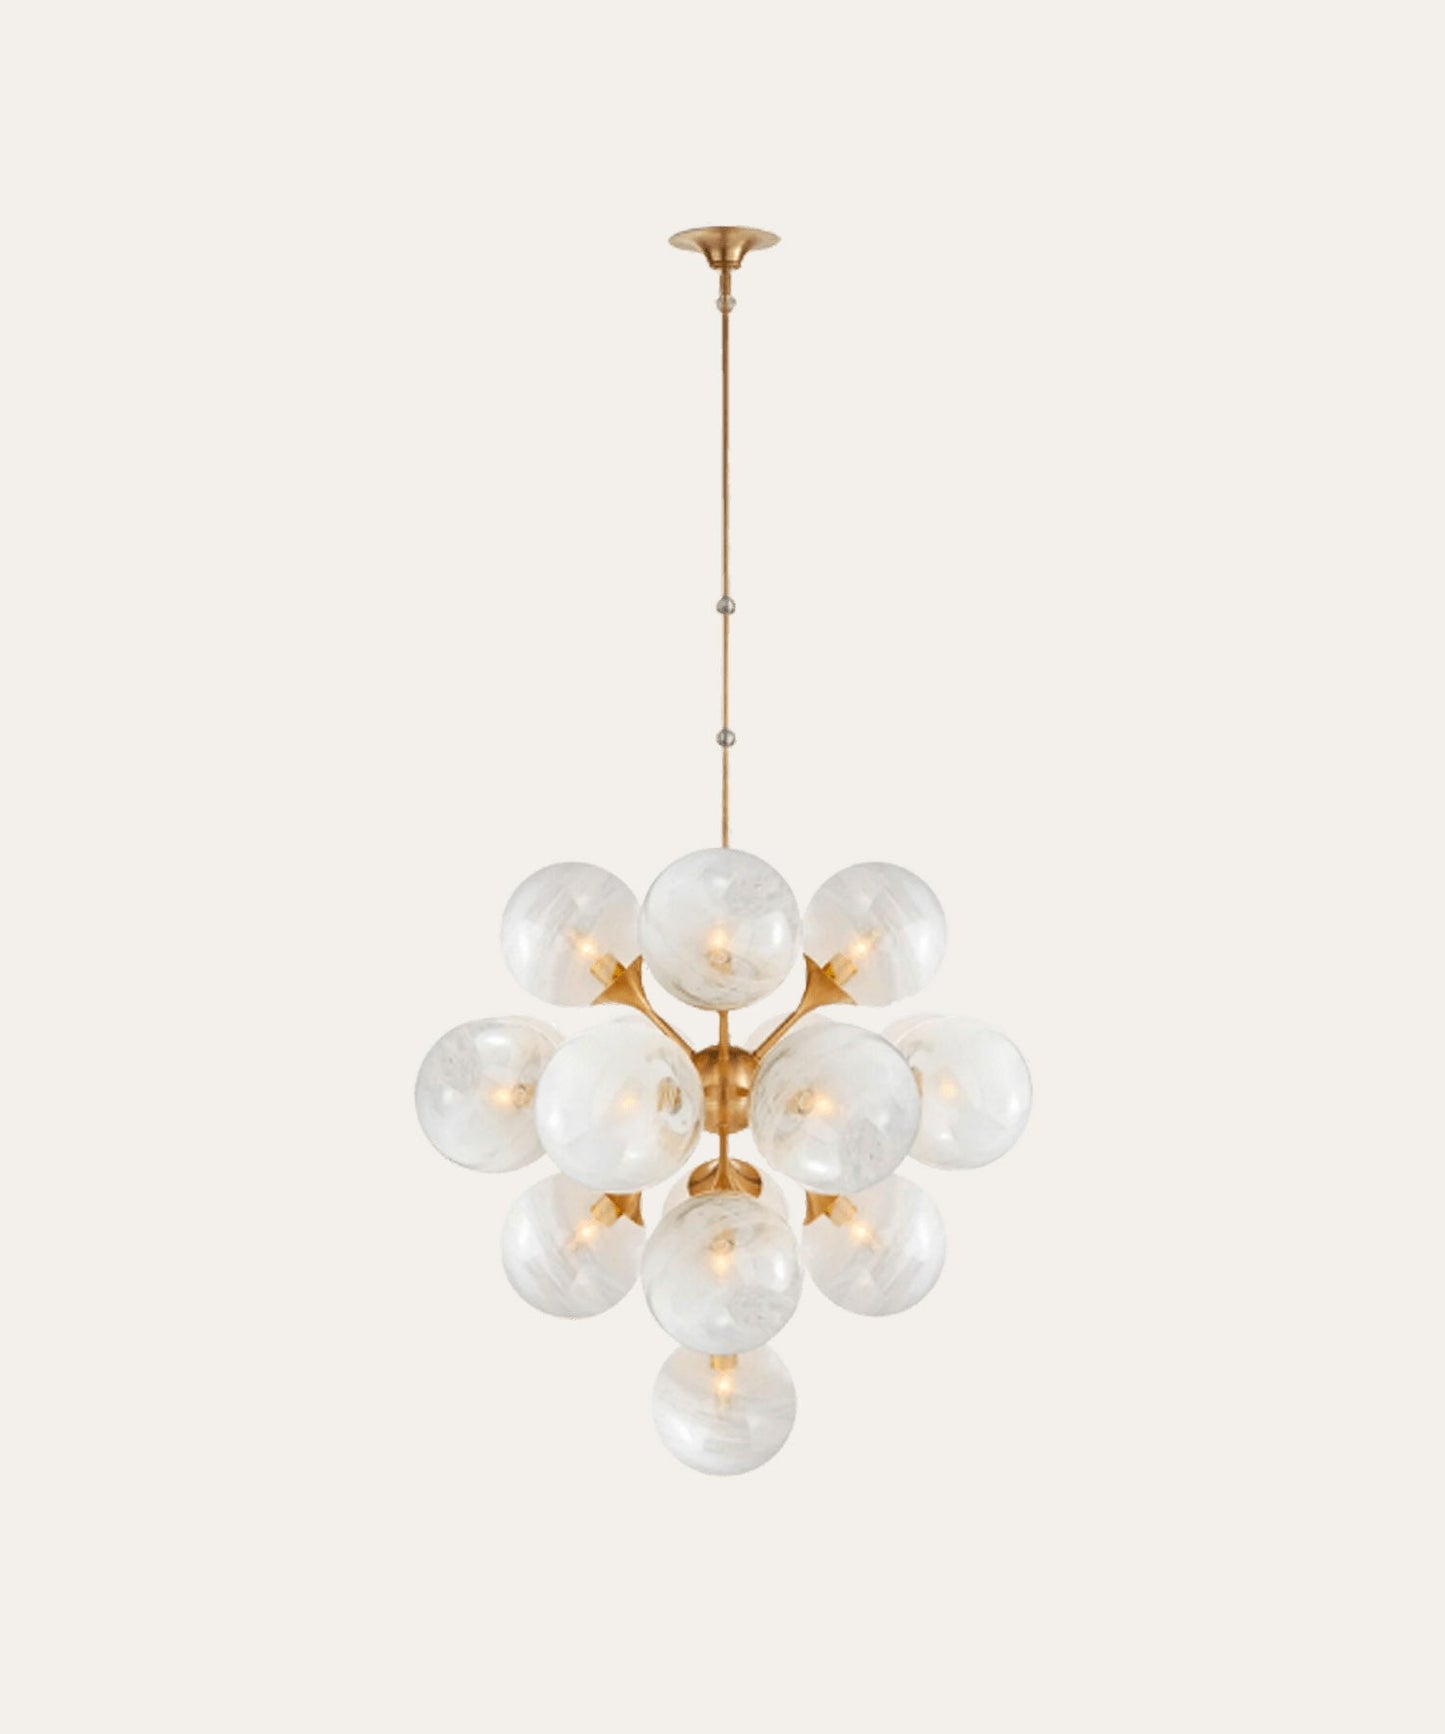 Cristol Large Tiered Chandelier - Stephenson House